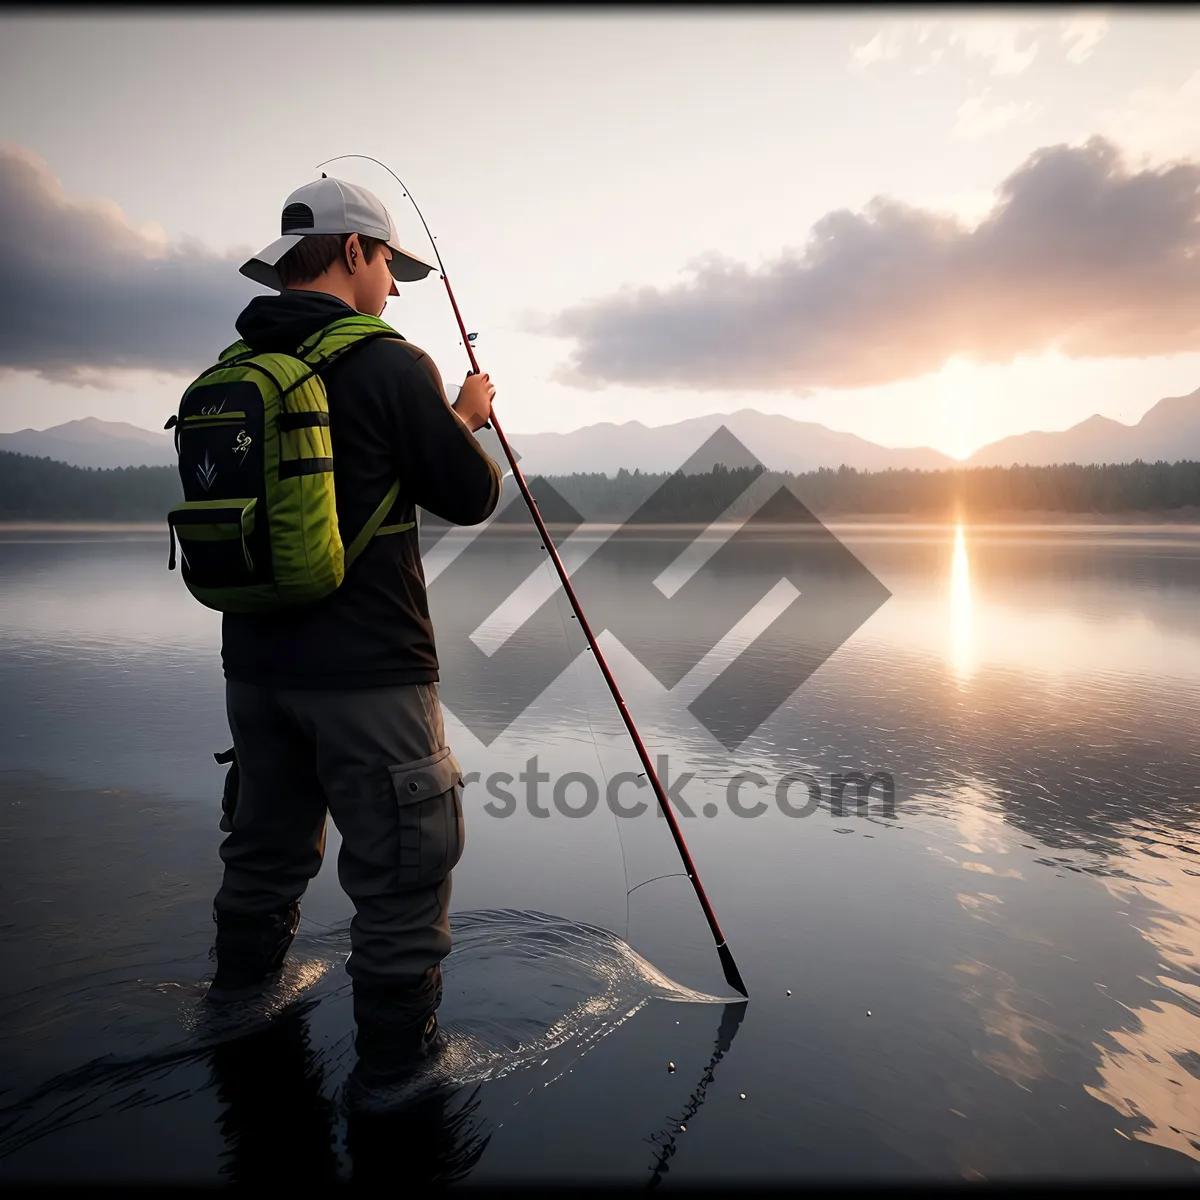 Picture of Reel Fishing: Man Enjoying Outdoor Leisure with Fishing Gear